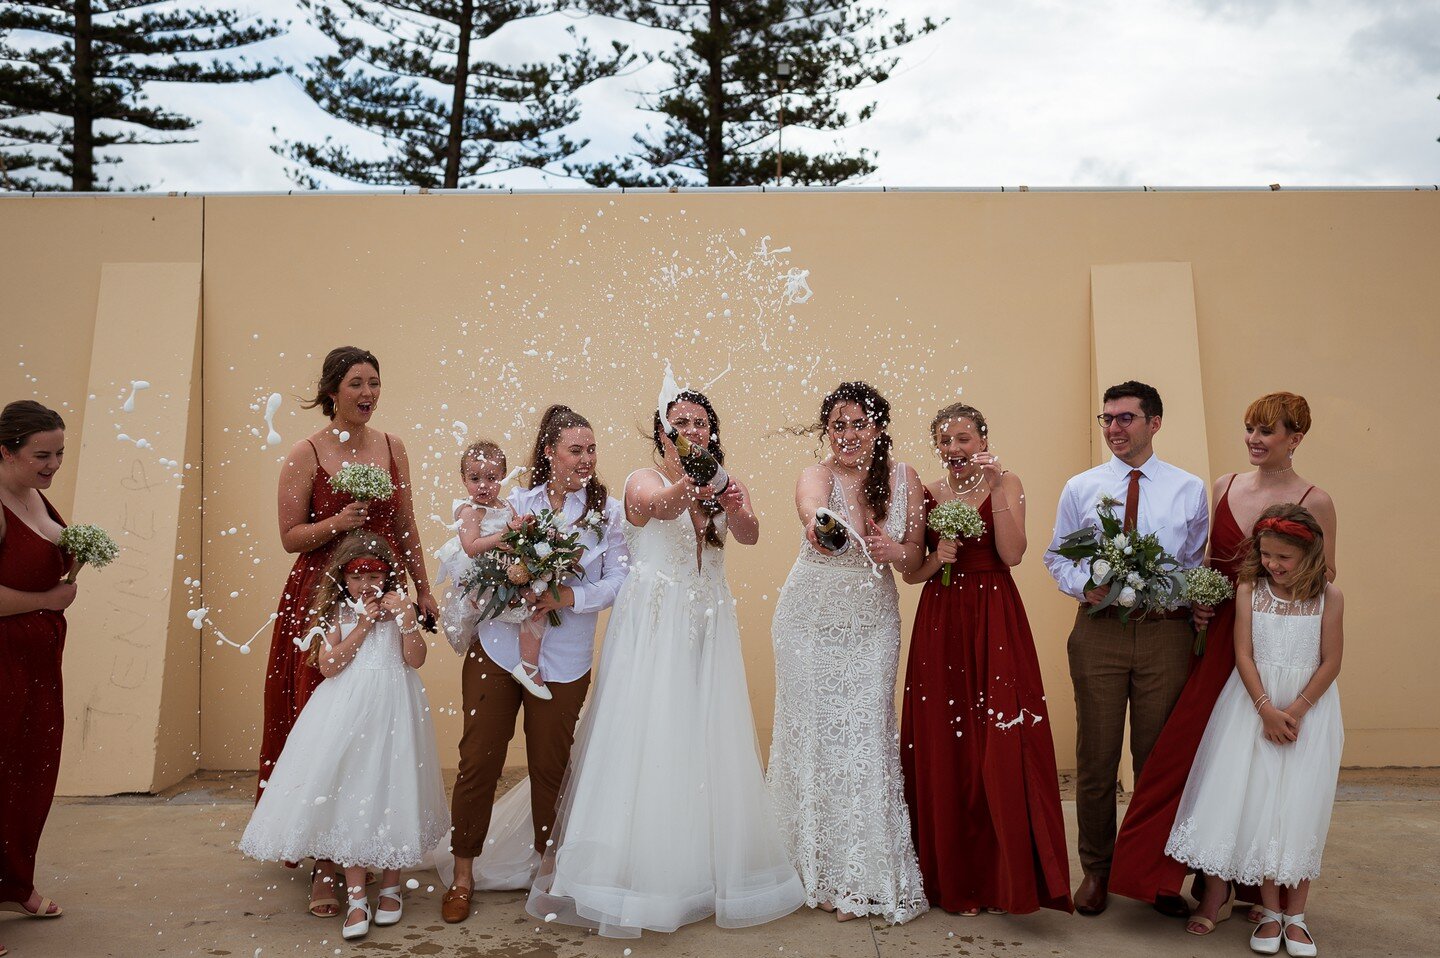 Brittany &amp; Bridy's wedding from the most popular wedding date last year (22.10.22) has just hit the blog. 
I would love for you to go check it out. Link in bio 

#weddingblog #weddingday #beachwedding #wollongongwedding #twobrides #mrsandmrs #sam